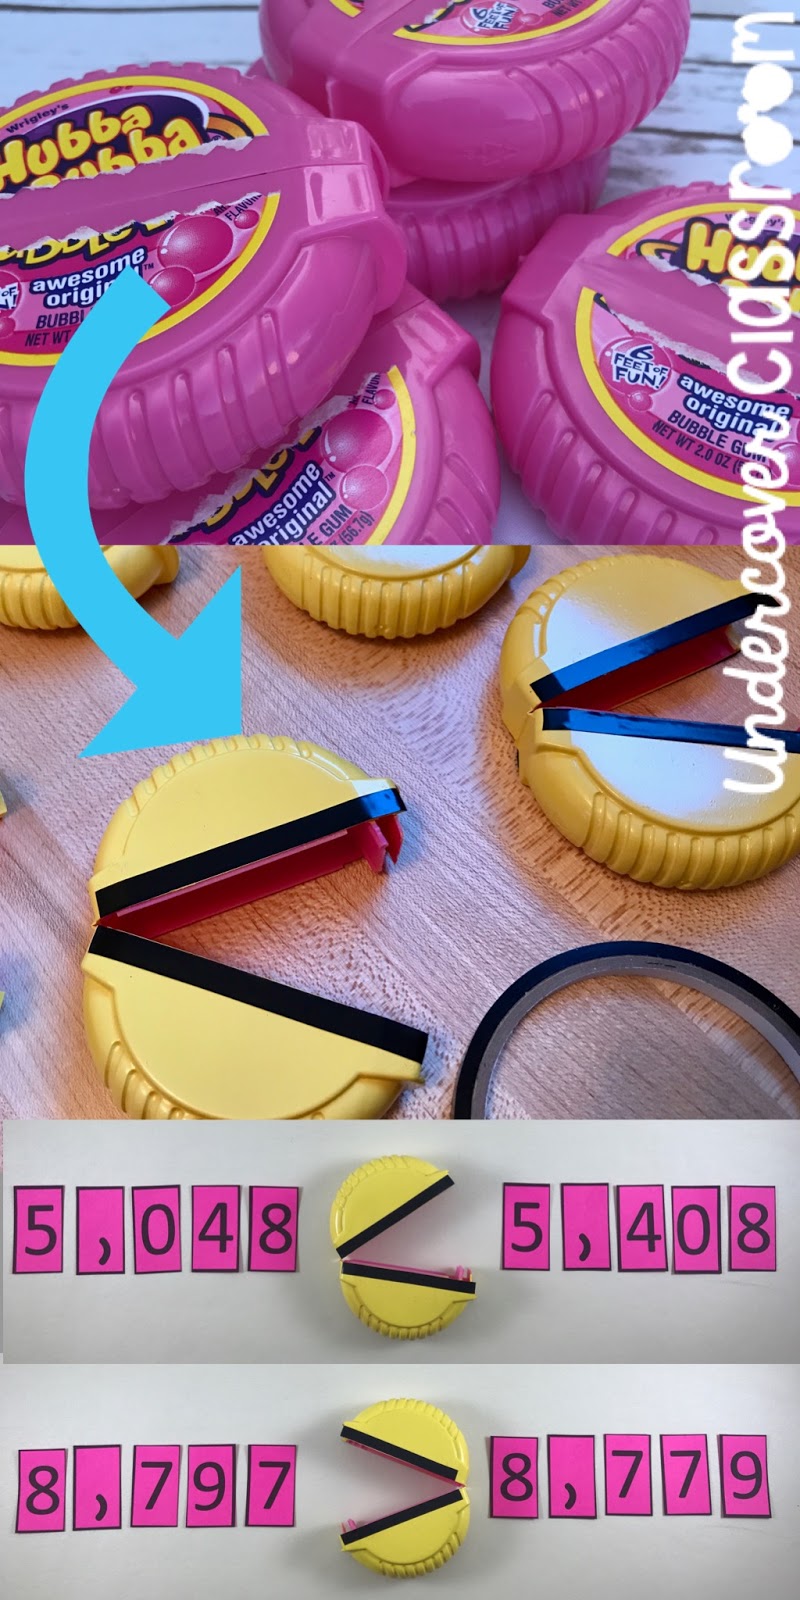 Transform some Hubba Bubba bubble tape containers into Pac Man number chompers! Use these as greater than, less than symbols to teach comparing numbers through place value.